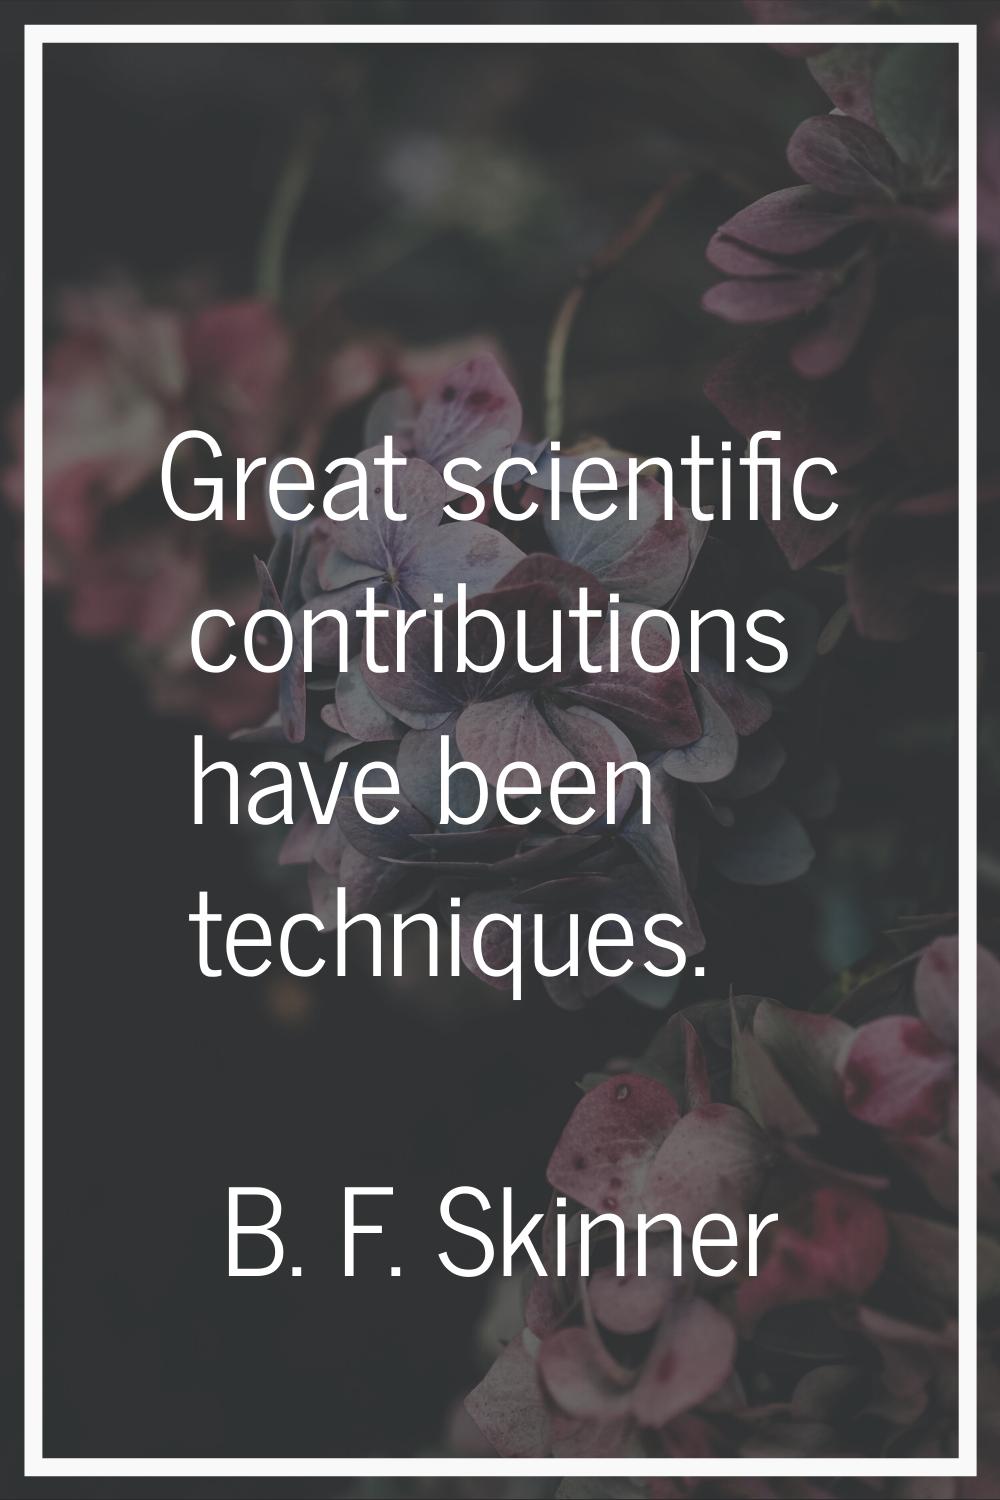 Great scientific contributions have been techniques.